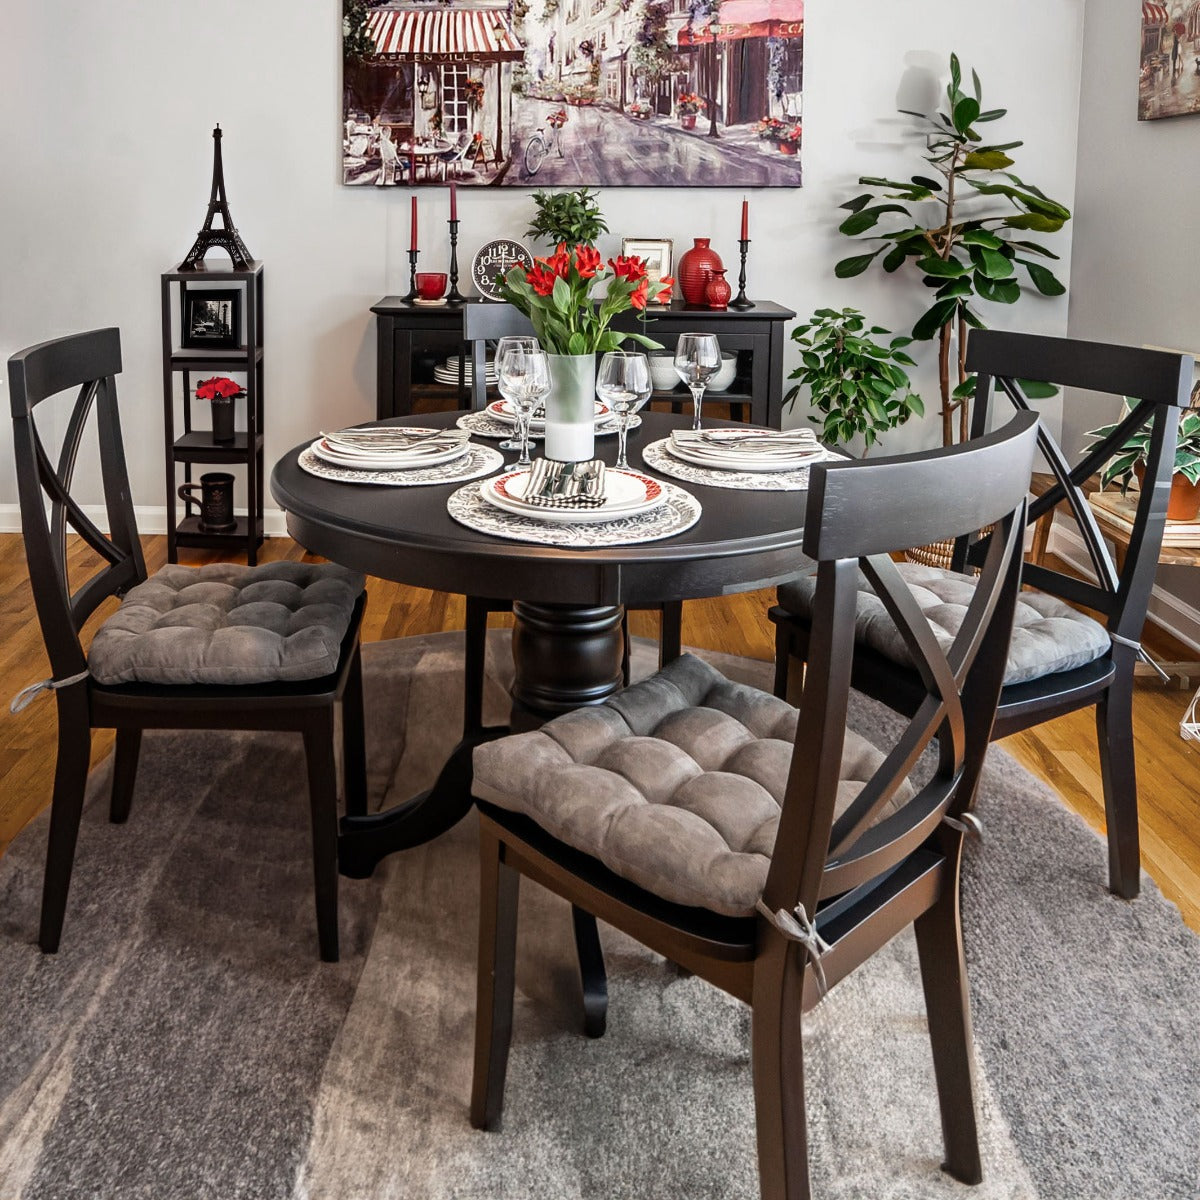 grey dining chair cushions on black chairs in dining room with paris bistro theme in gray black and red